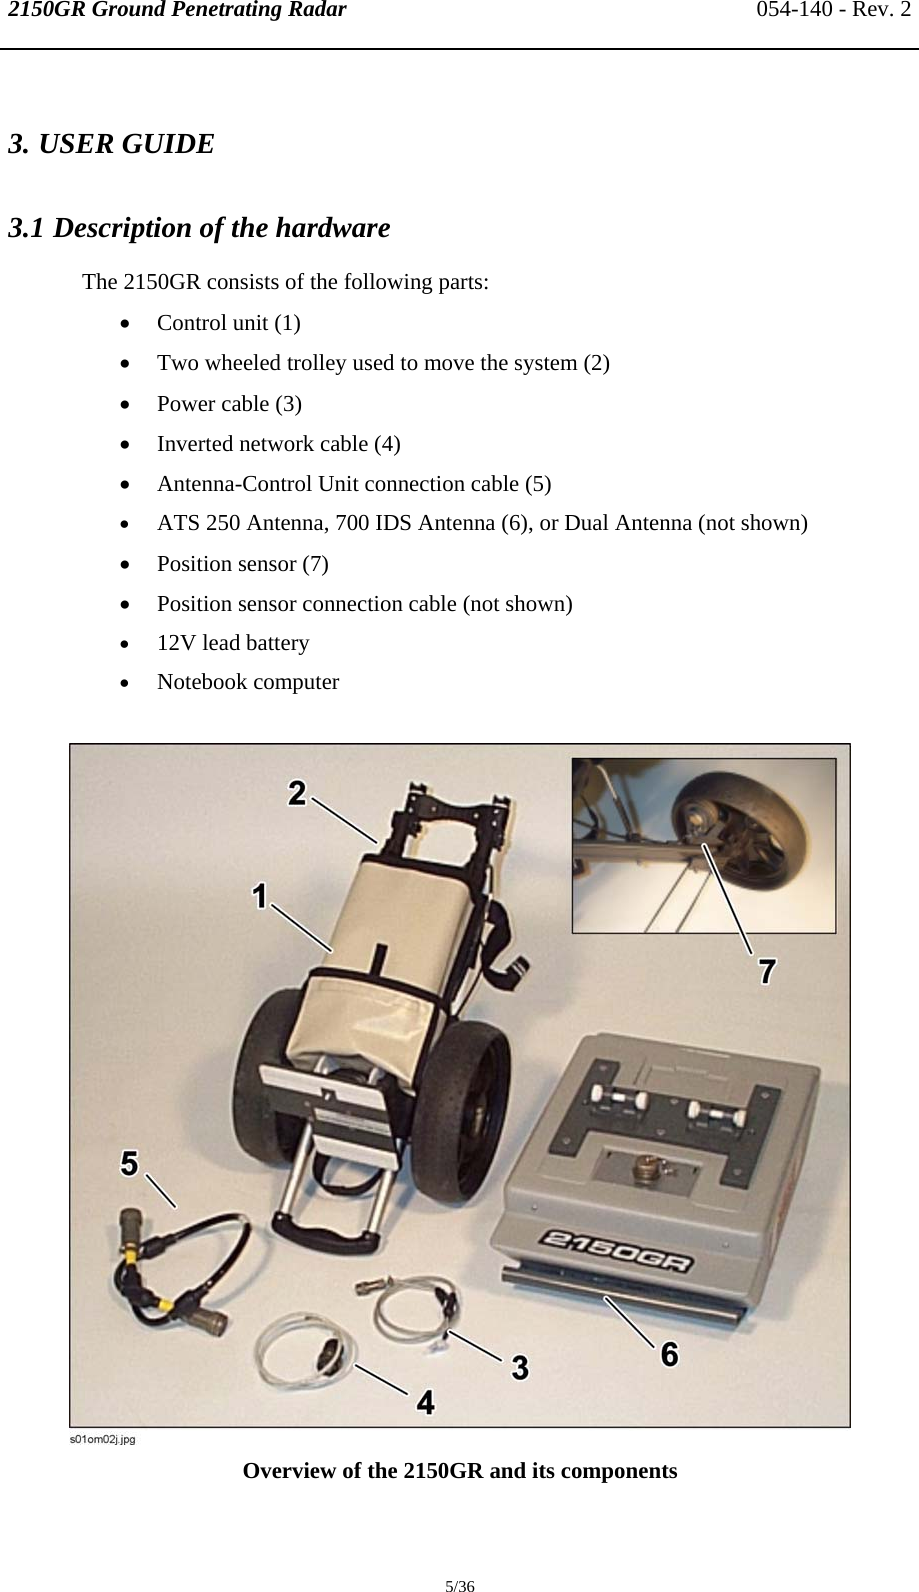 2150GR Ground Penetrating Radar 054-140 - Rev. 2  5/36 3. USER GUIDE 3.1 Description of the hardware The 2150GR consists of the following parts: • Control unit (1) • Two wheeled trolley used to move the system (2) • Power cable (3) • Inverted network cable (4) • Antenna-Control Unit connection cable (5) • ATS 250 Antenna, 700 IDS Antenna (6), or Dual Antenna (not shown) • Position sensor (7) • Position sensor connection cable (not shown) • 12V lead battery • Notebook computer   Overview of the 2150GR and its components 